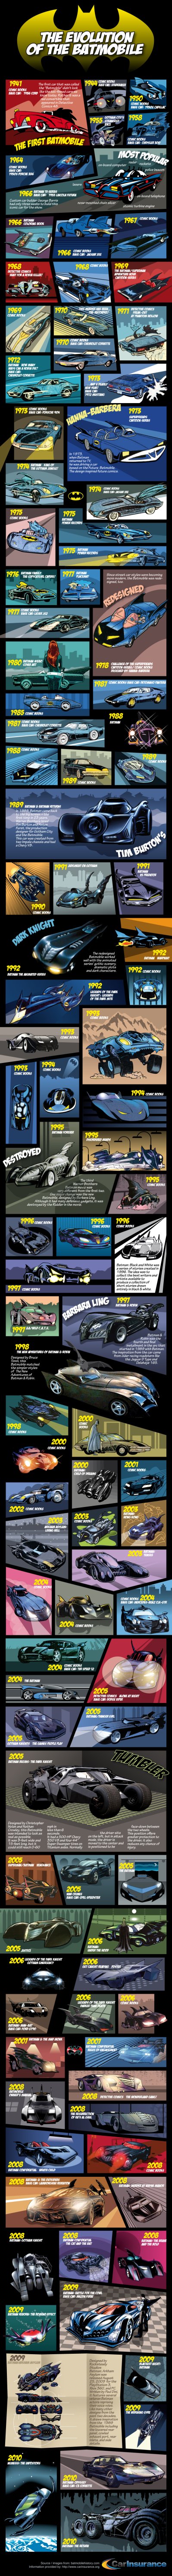 the complete history of the BATMOBILE!!!